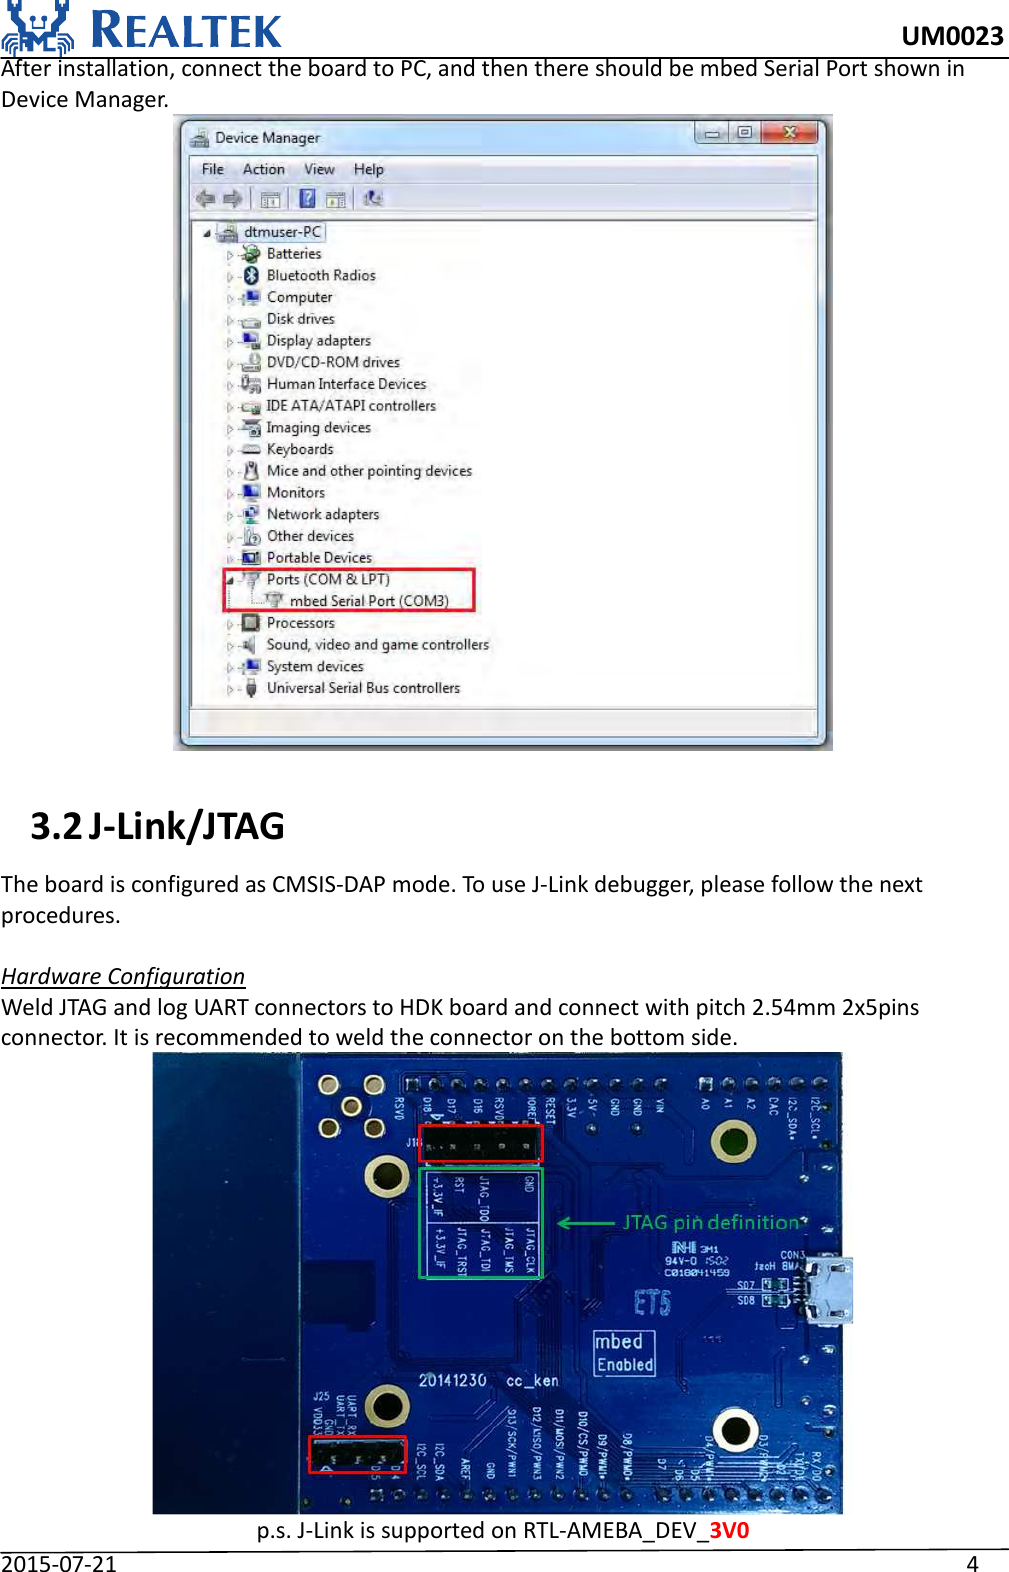     UM0023 2015-07-21                                                                    4 After installation, connect the board to PC, and then there should be mbed Serial Port shown in Device Manager.   3.2 J-Link/JTAG The board is configured as CMSIS-DAP mode. To use J-Link debugger, please follow the next procedures.  Hardware Configuration Weld JTAG and log UART connectors to HDK board and connect with pitch 2.54mm 2x5pins connector. It is recommended to weld the connector on the bottom side.  p.s. J-Link is supported on RTL-AMEBA_DEV_3V0 